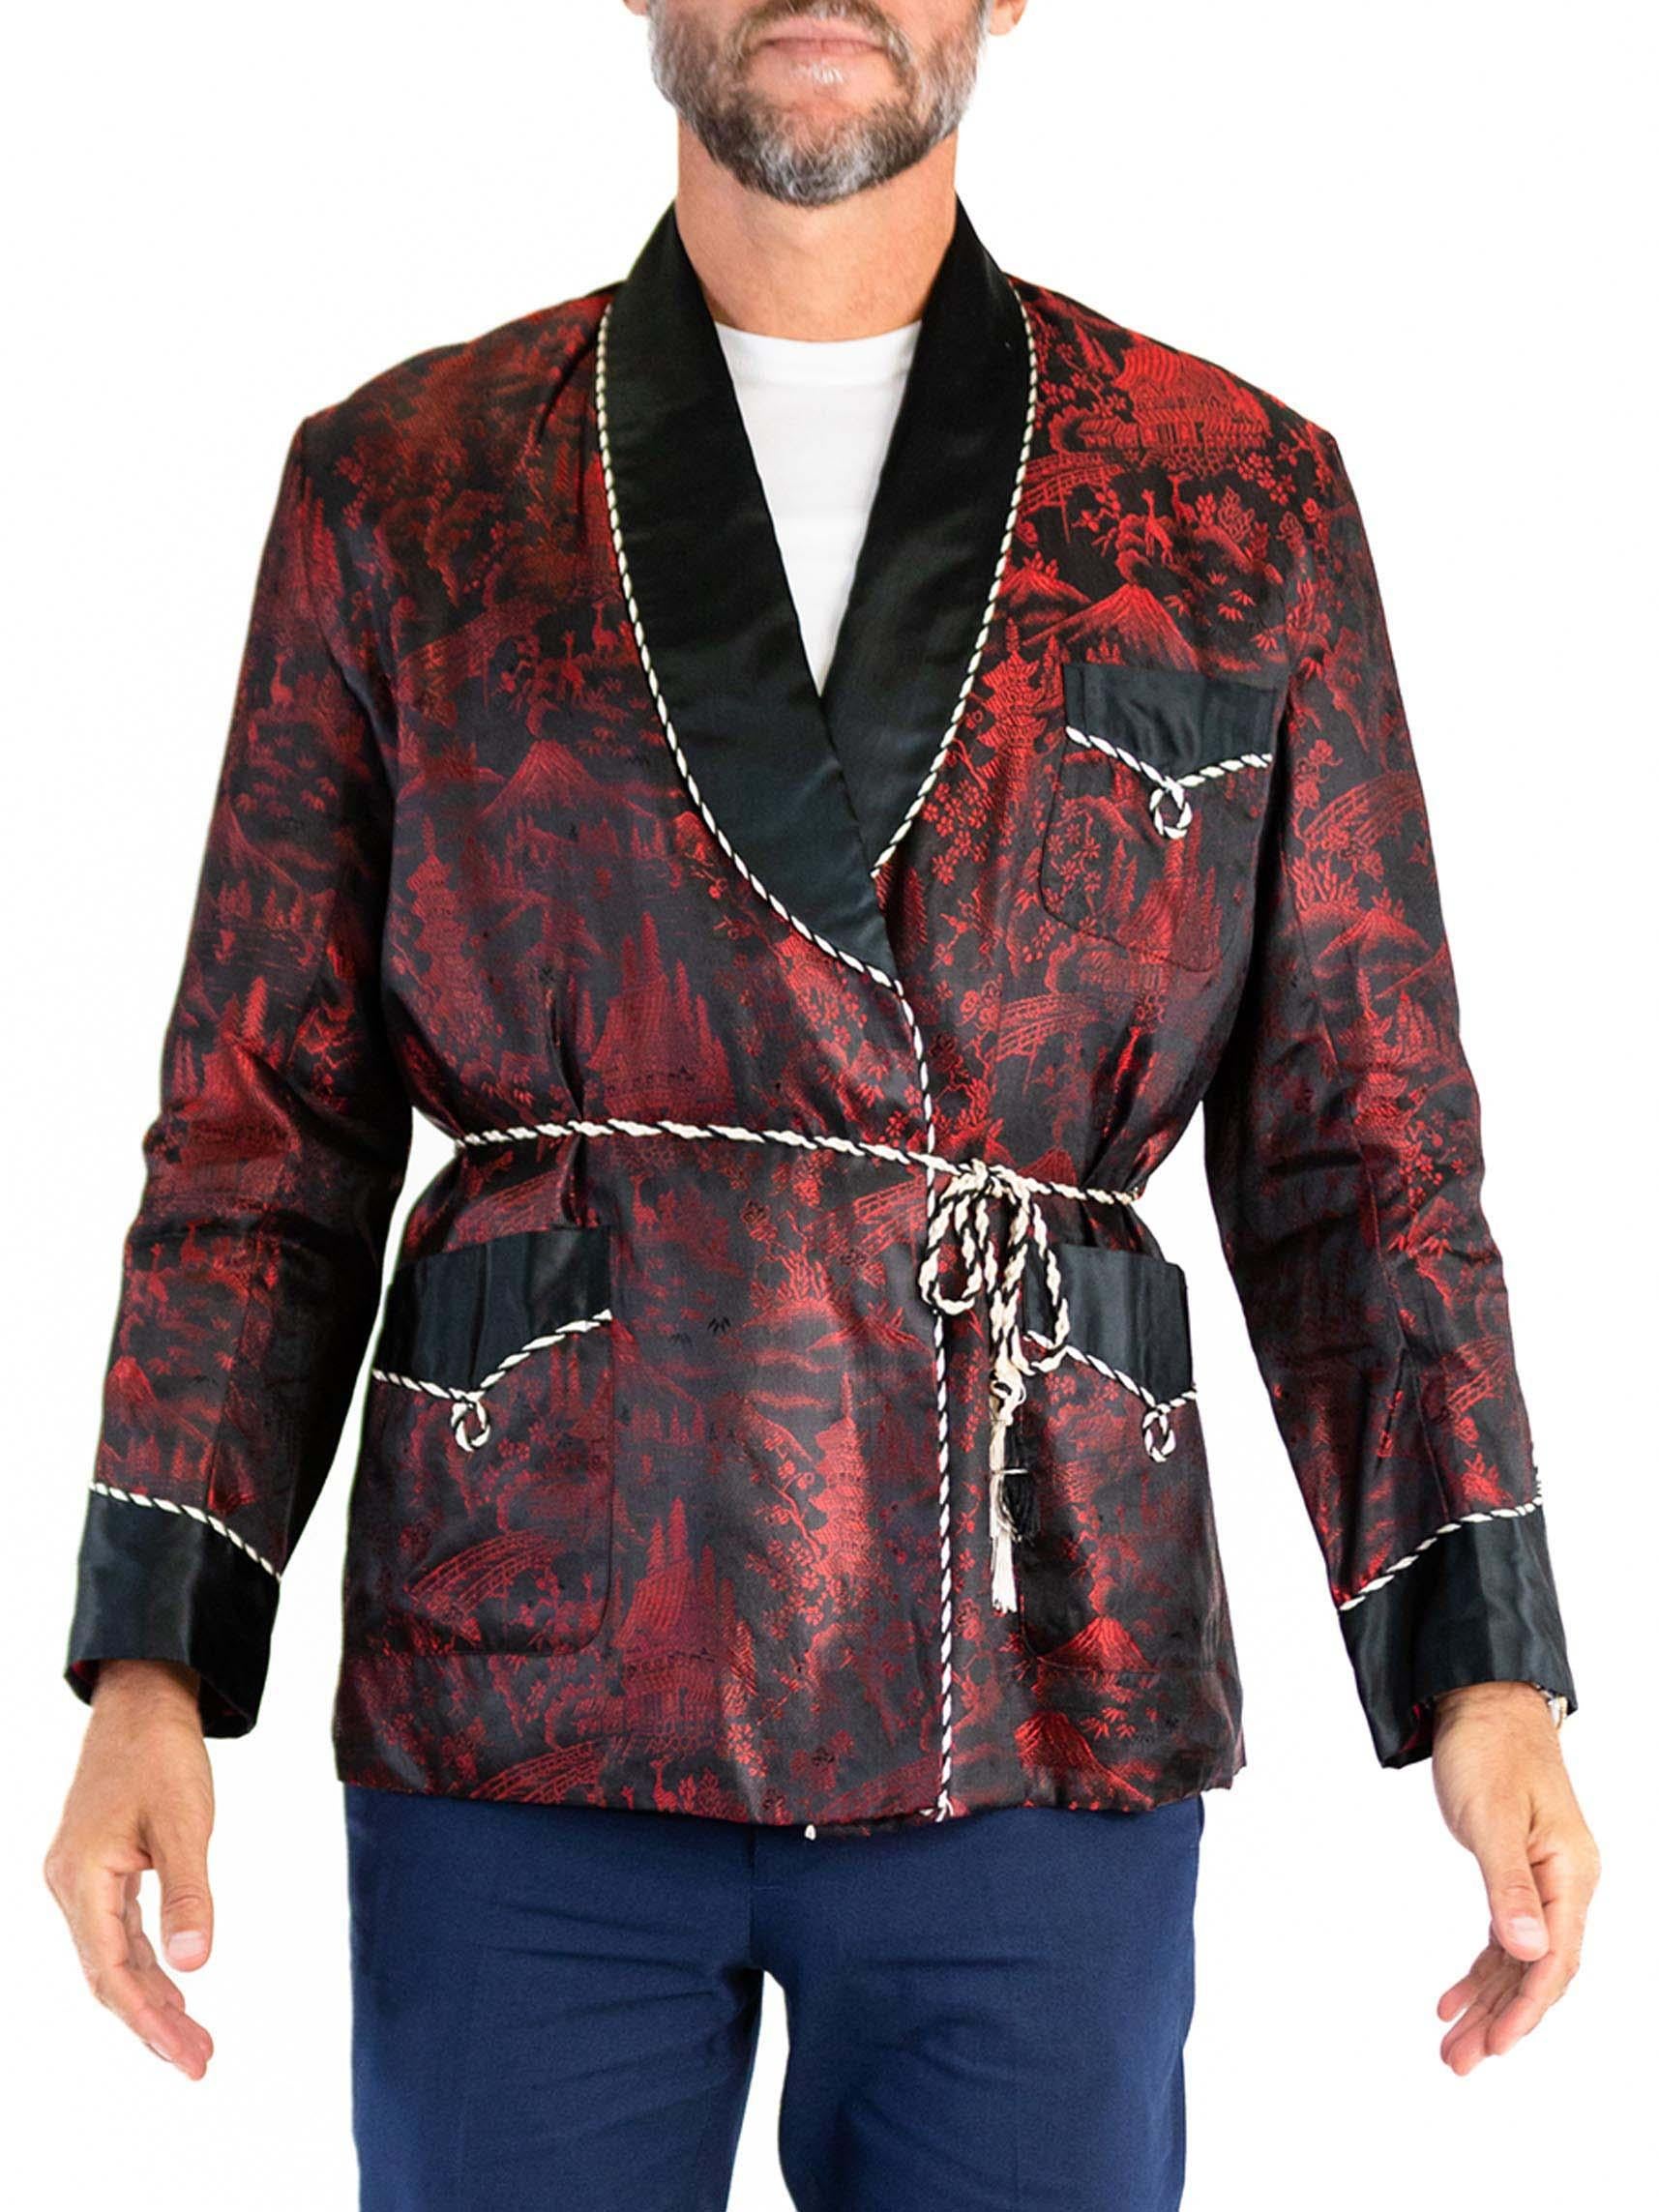 1950S Black & Red Rayon Blend Jacquard Japanese Scenic Smoking Jacket With Rope 1